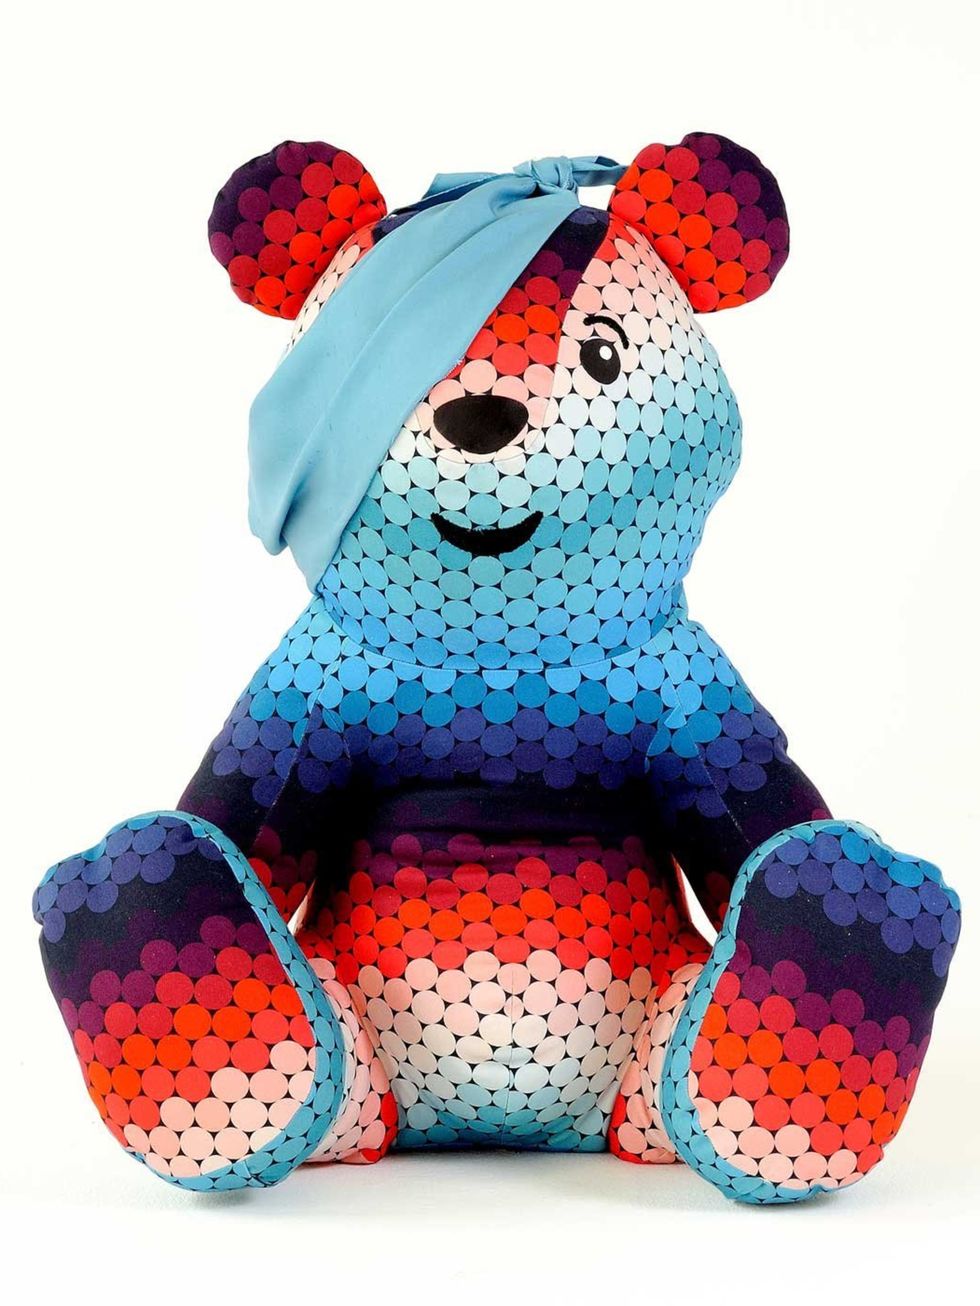 <p>Pudsey Bear by Jonathan Saunders for Children in Need</p>